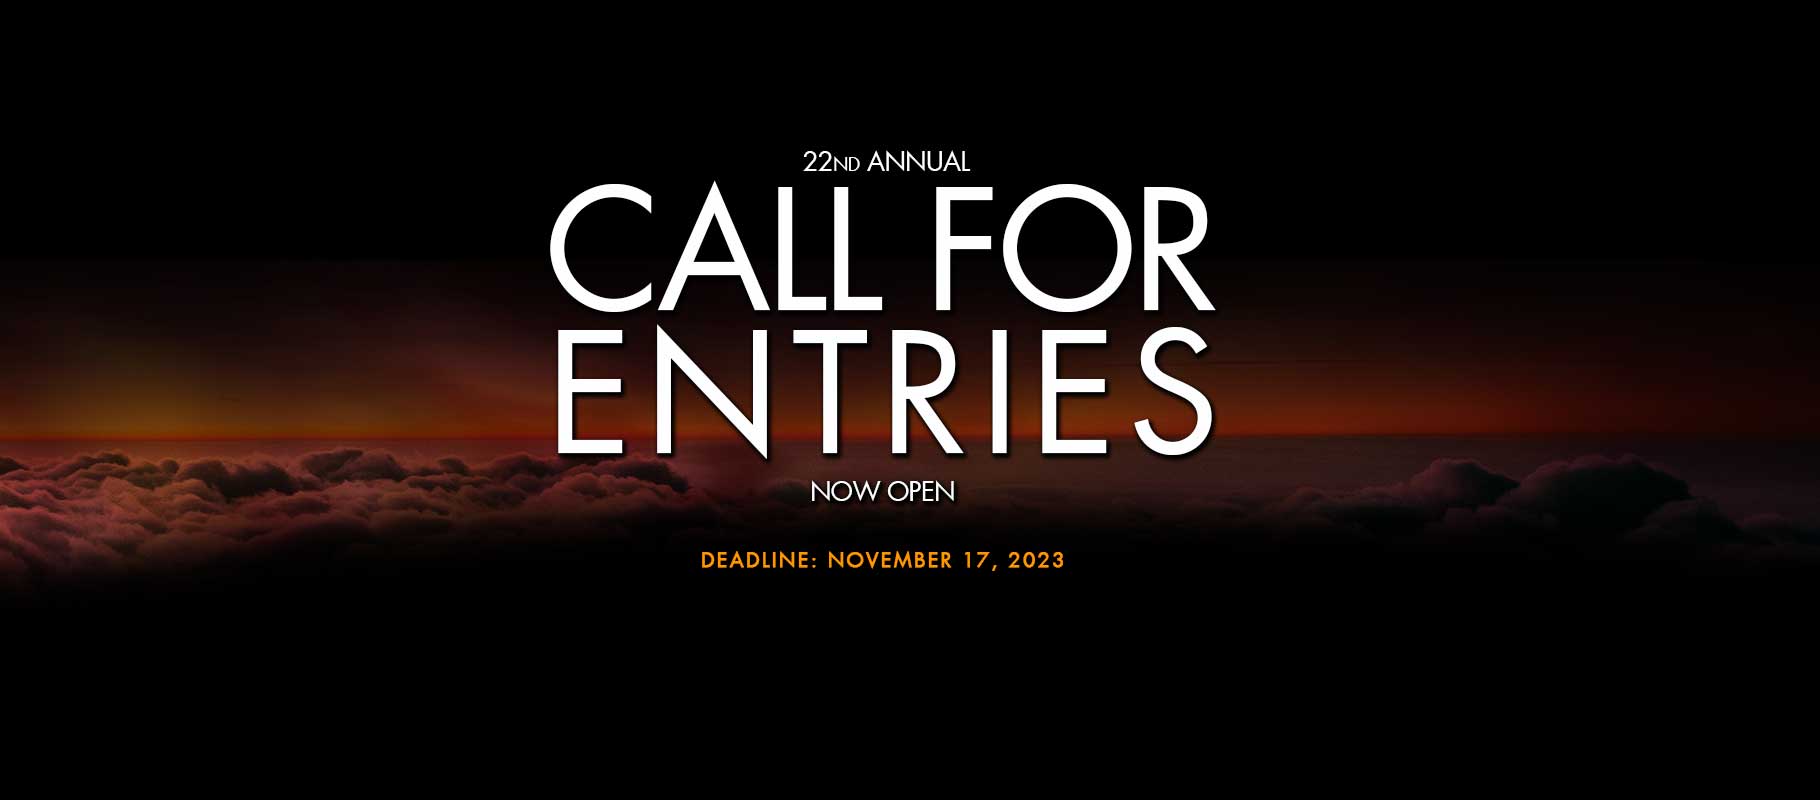 Enter the 2023 Web Design Awards Competition - Call for entries